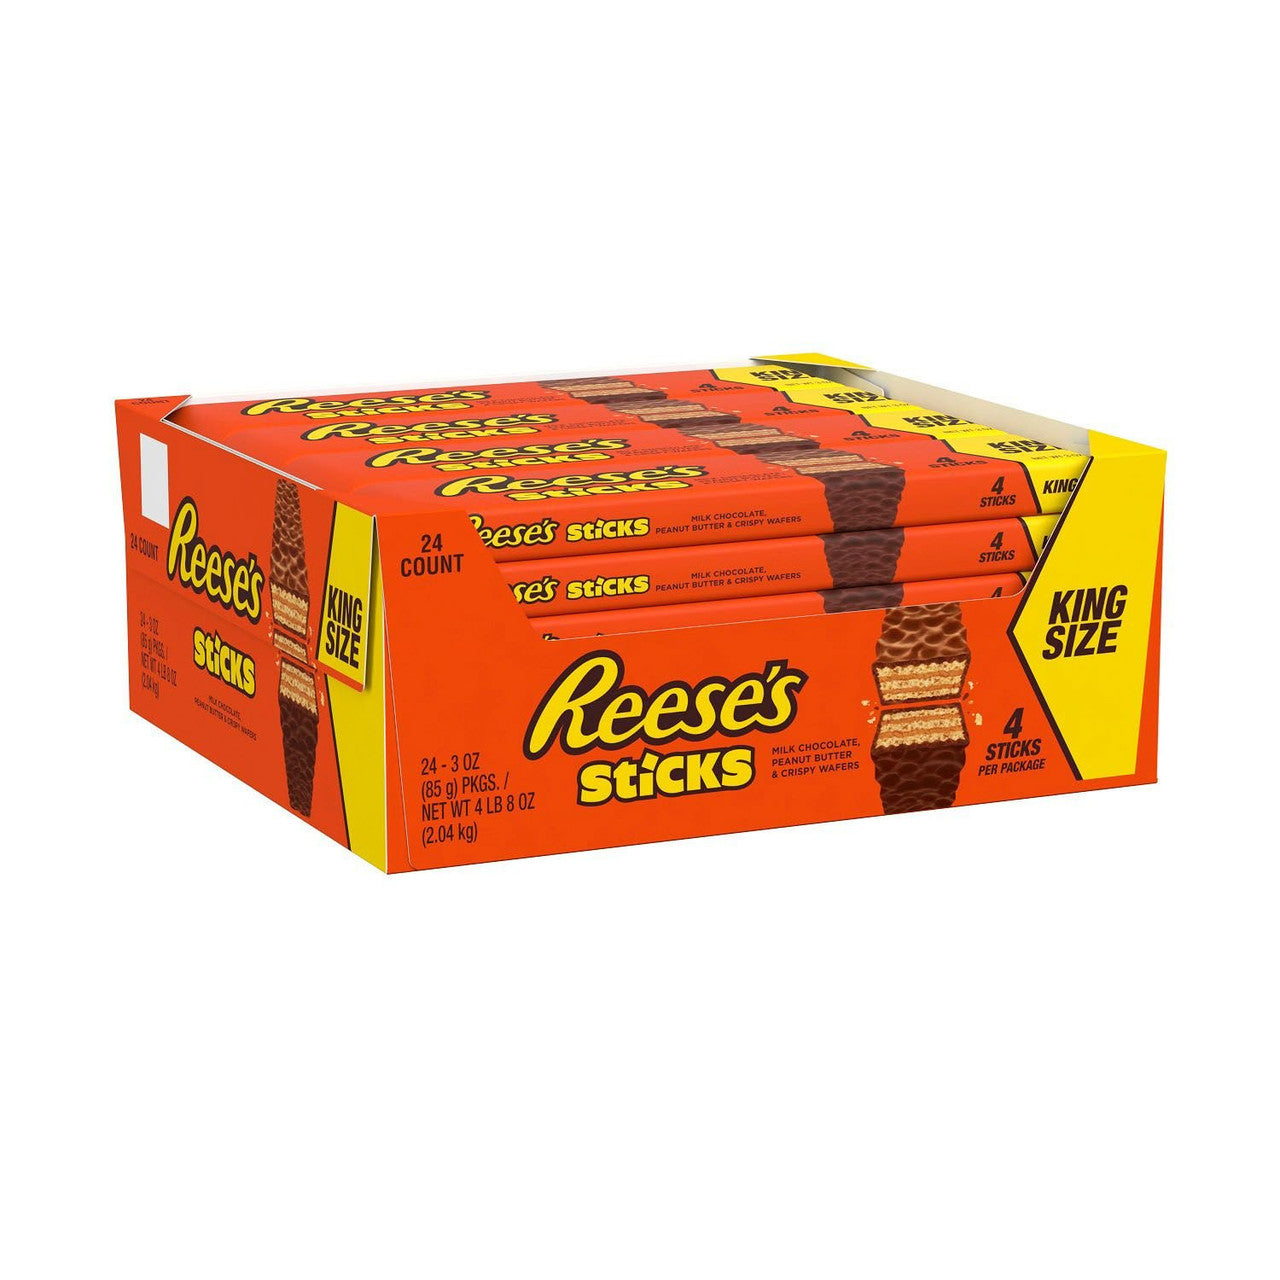 Reese's Sticks, King Size (24 ct.) 85g/3 oz., per Bar, {Imported from Canada}